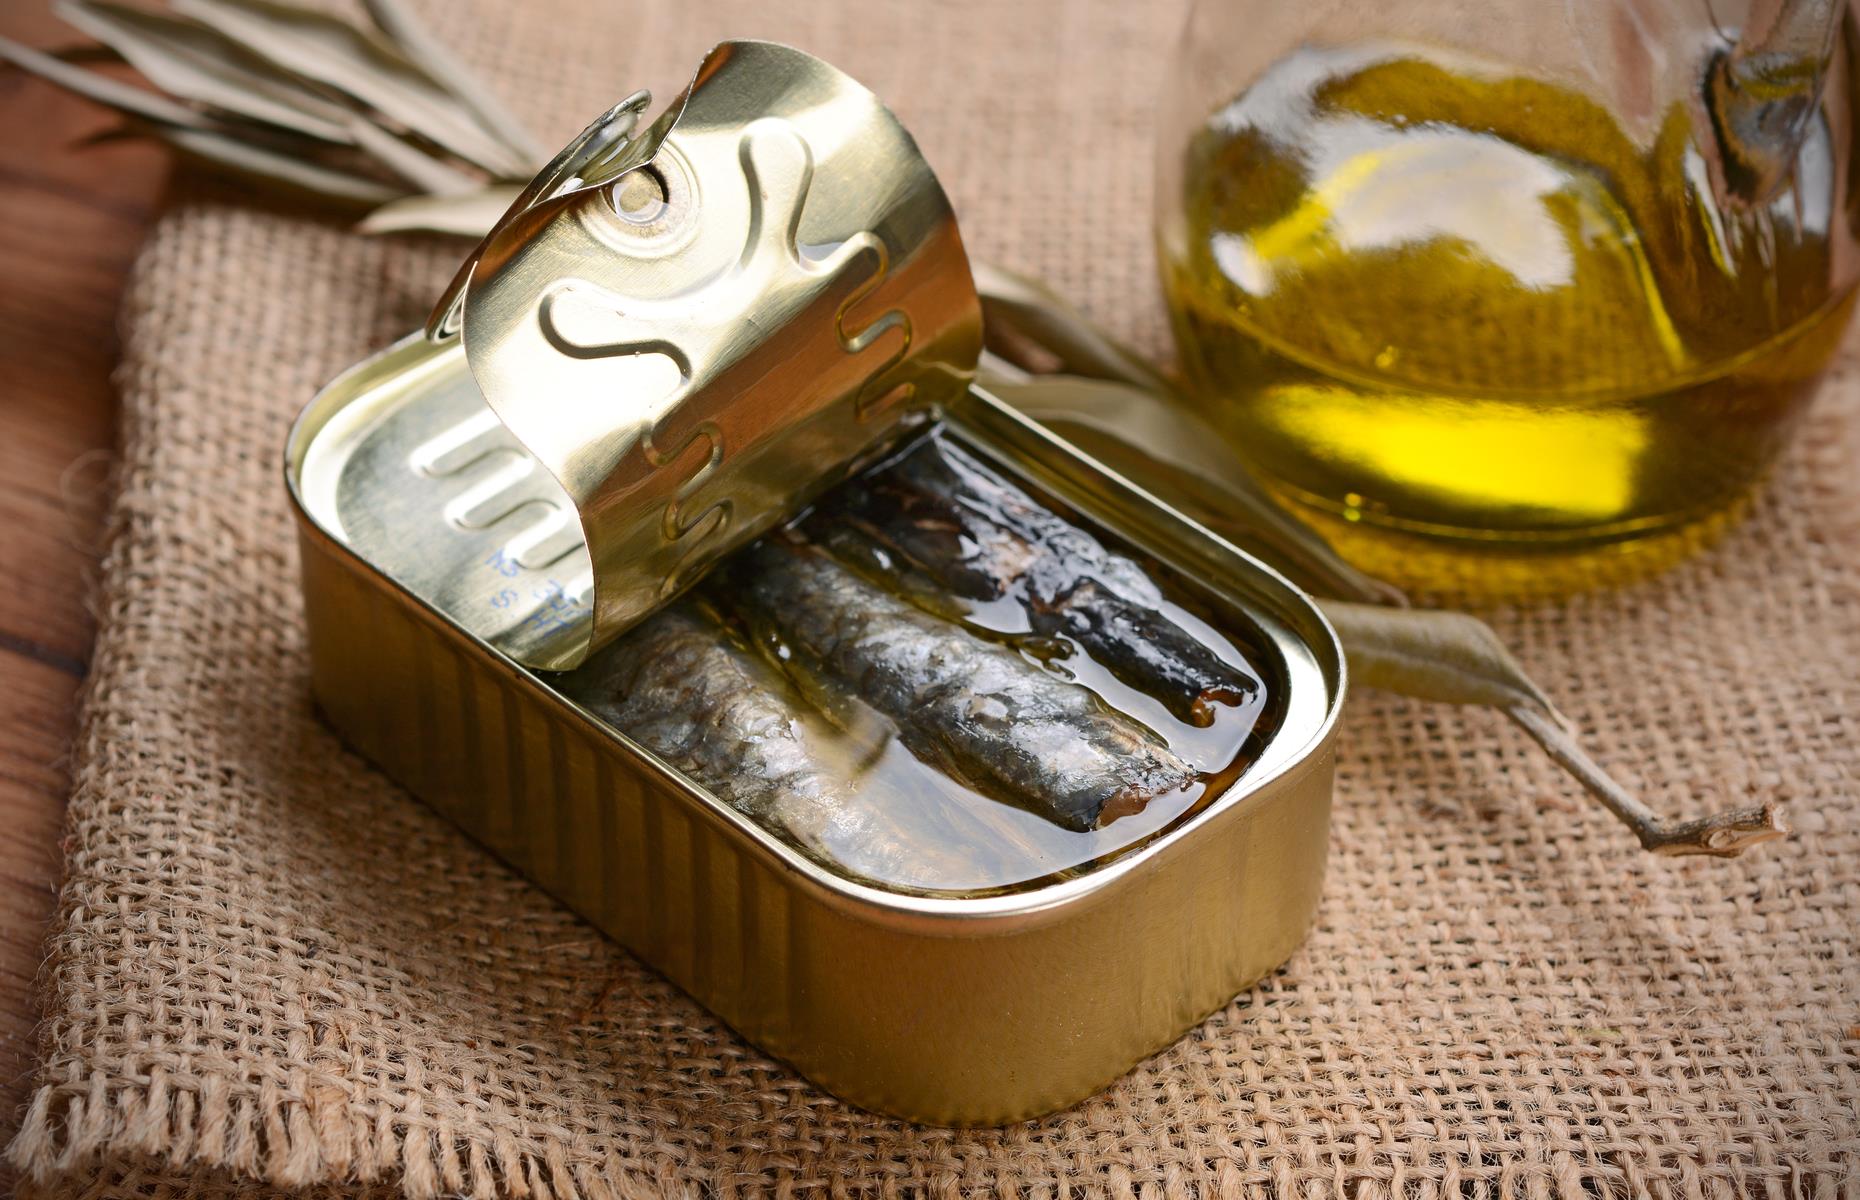 Italy and Spain: Anchovies